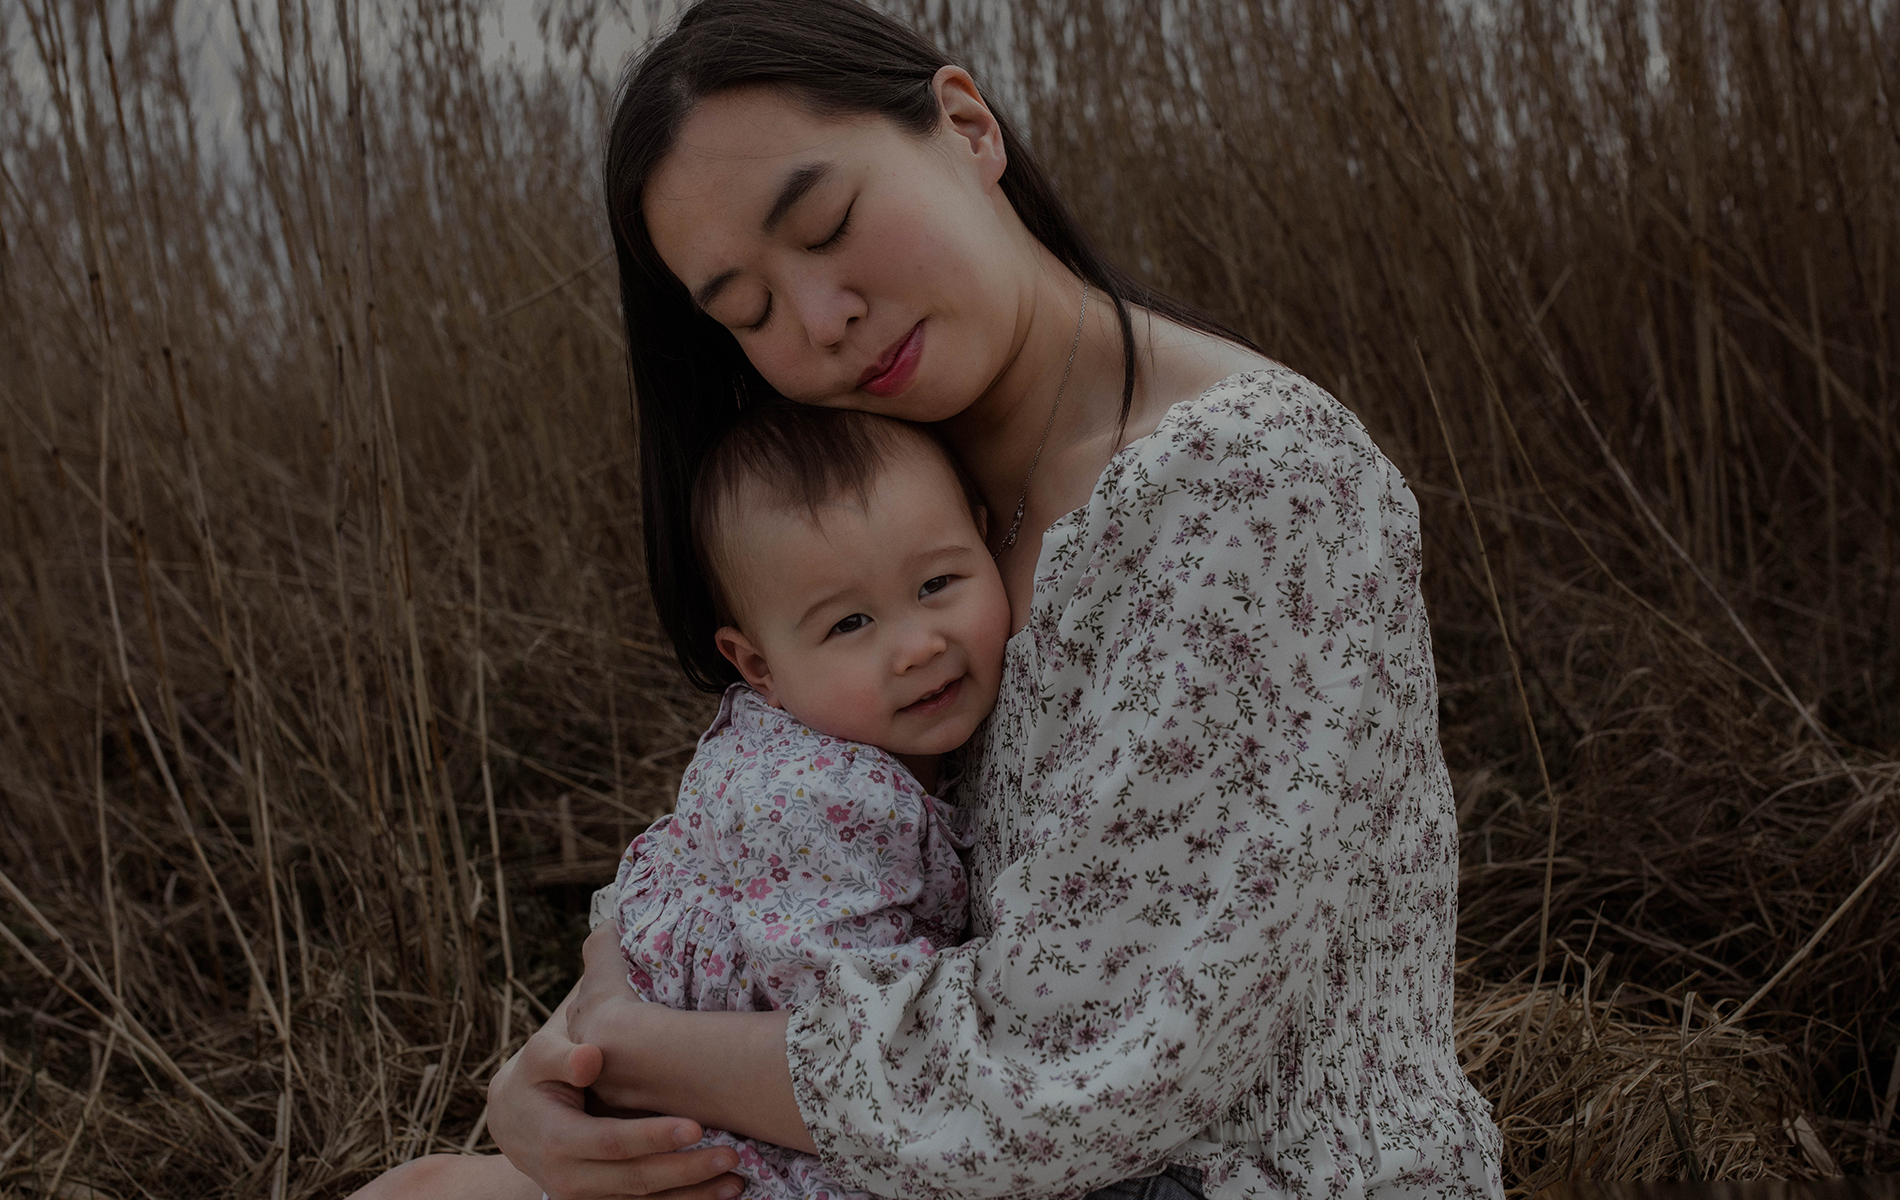 mother with dark hair in flowery shirt cuddles her little girl who is wearing a floral dress